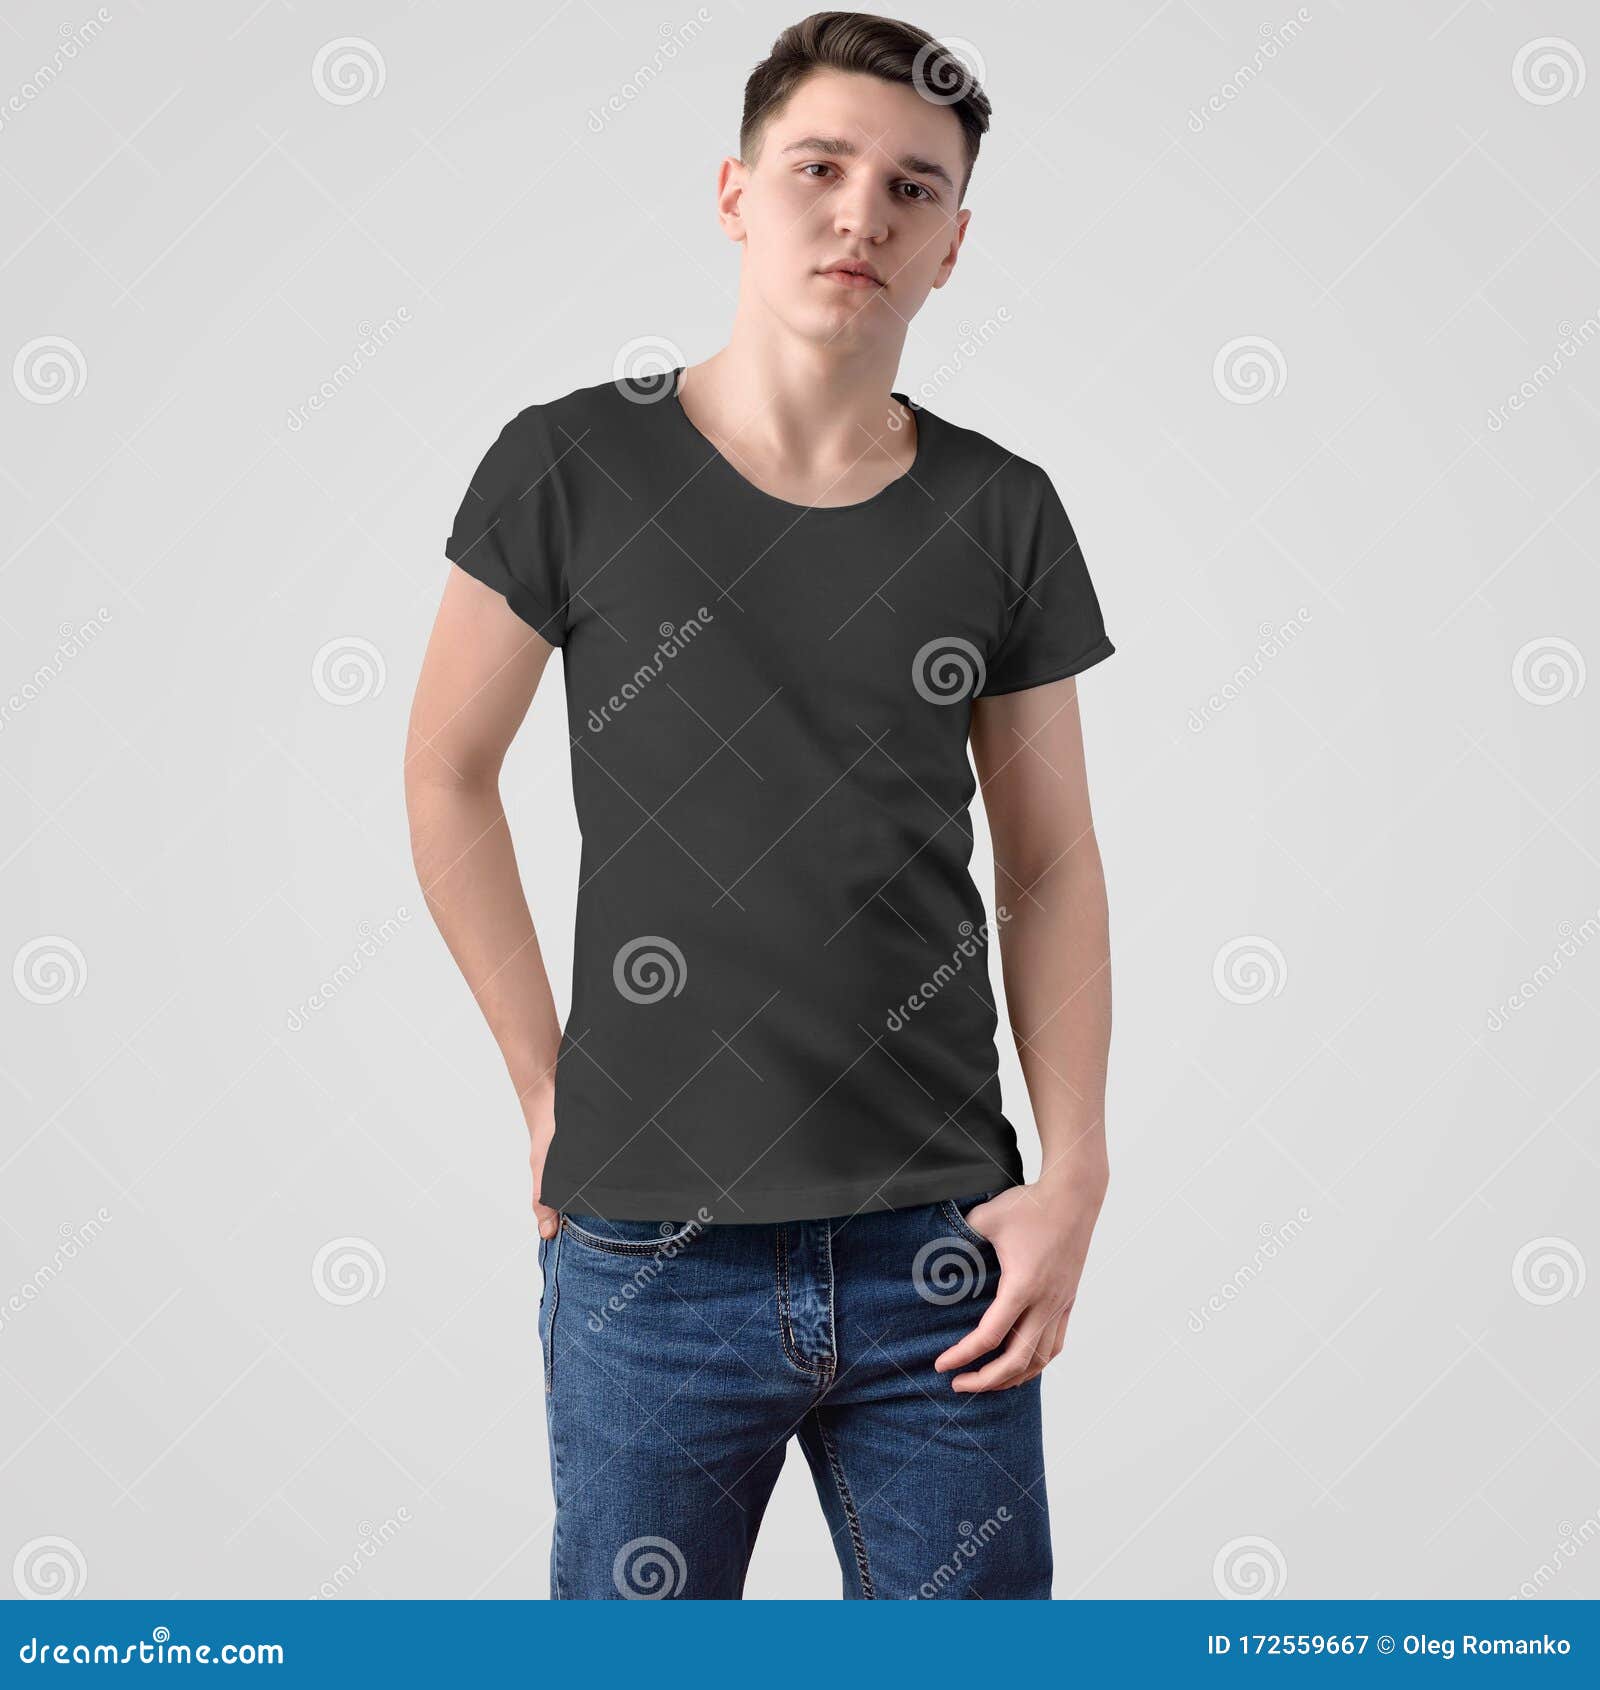 Download Mockup Of Clean Black T-shirts On A Young Guy In Blue ...